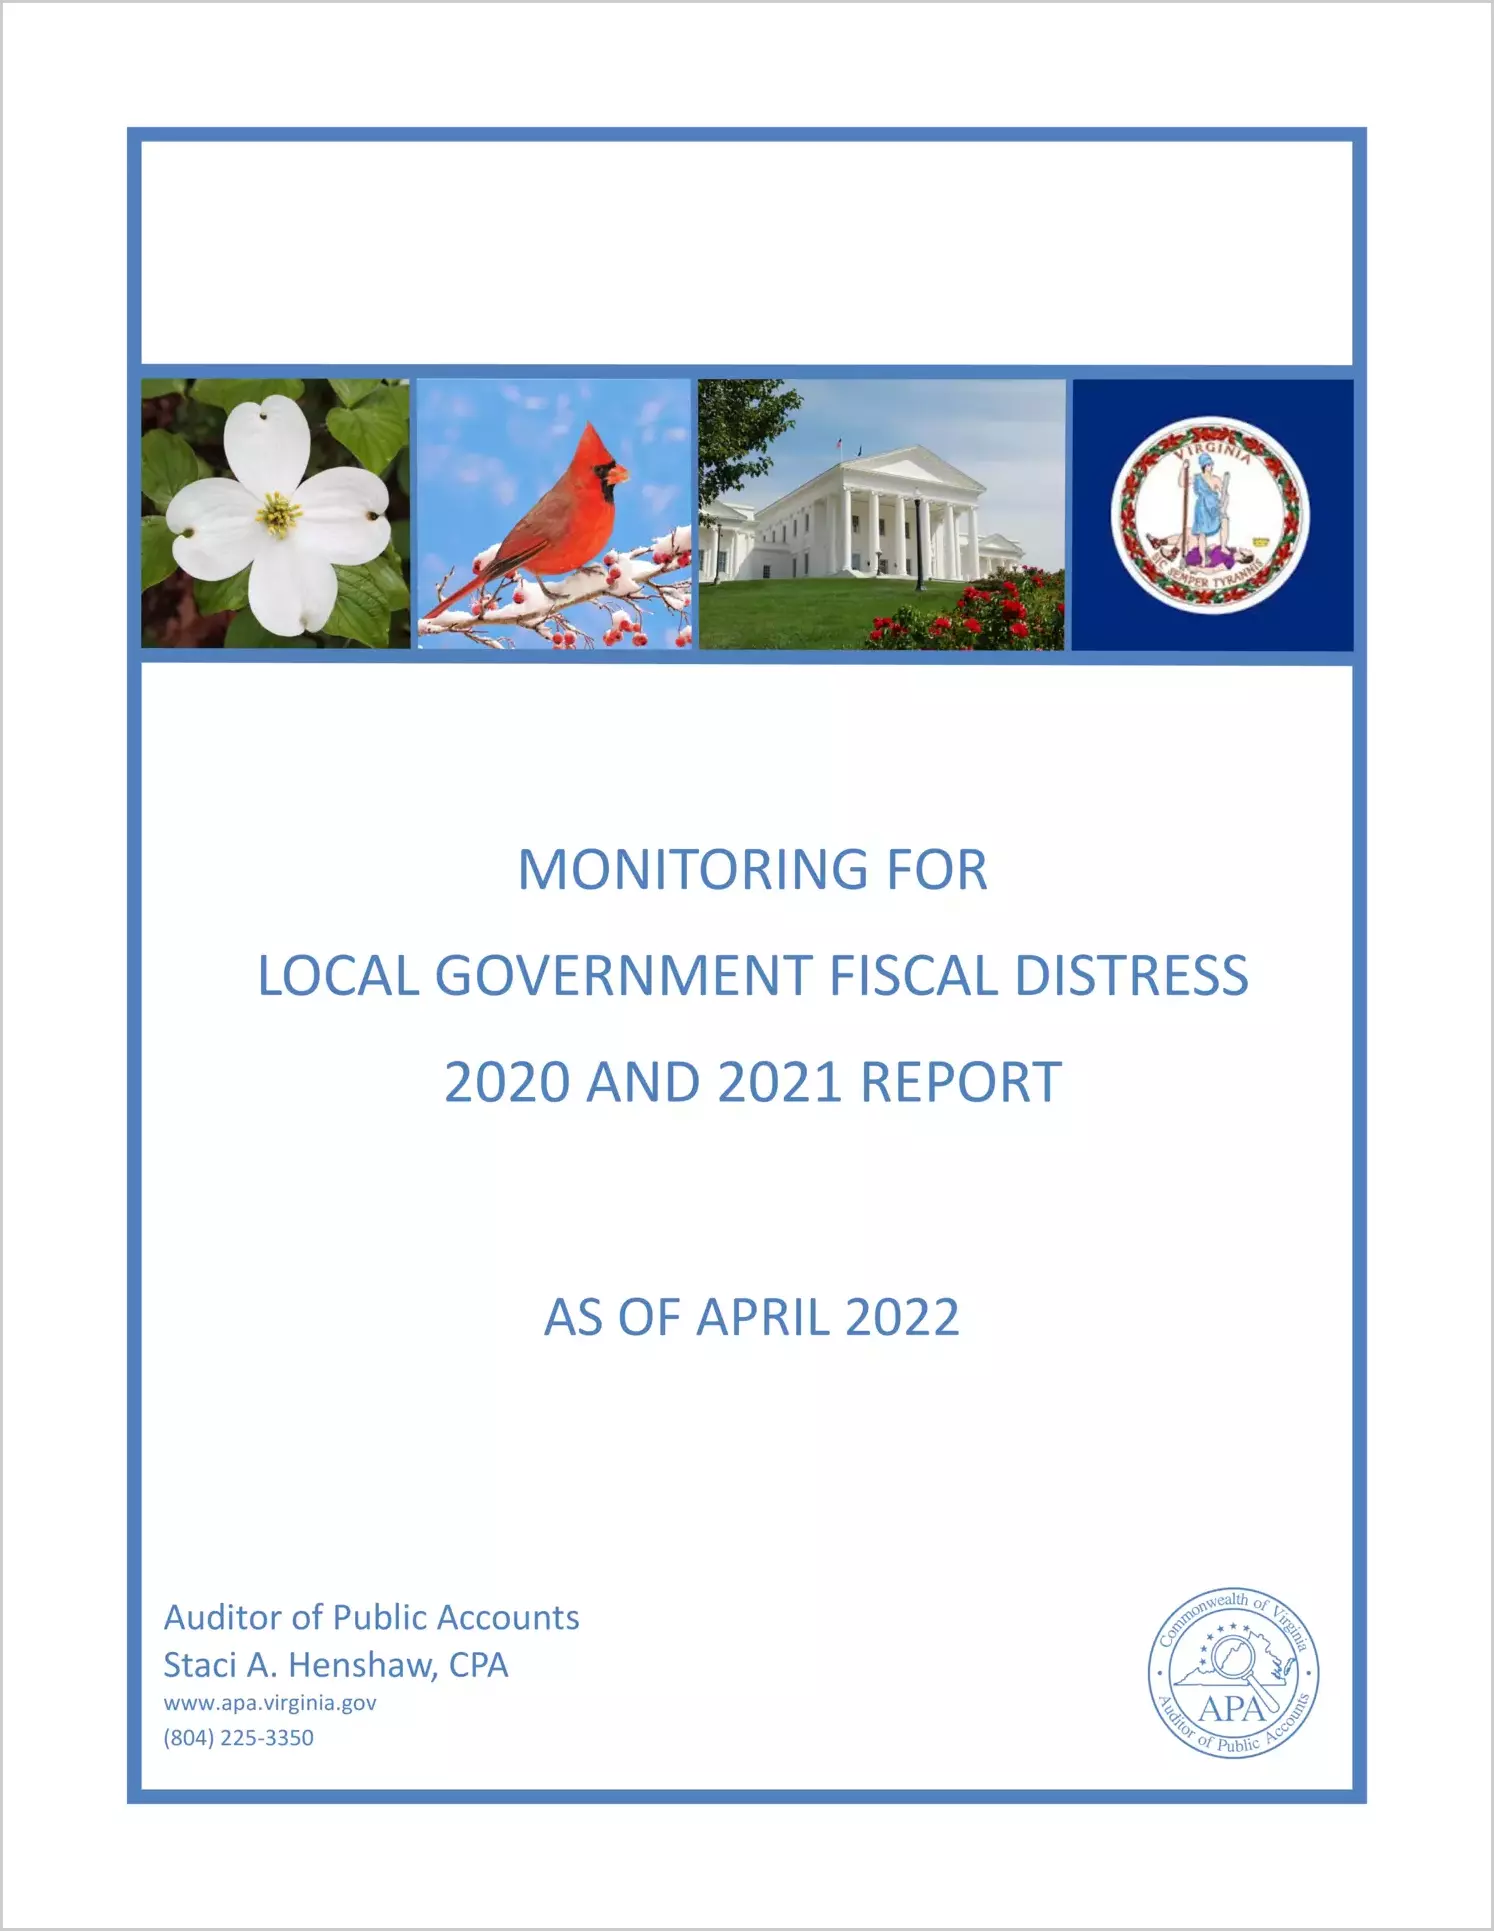 Monitoring for Local Government Fiscal Distress 2020-2021 Report as of April 2022